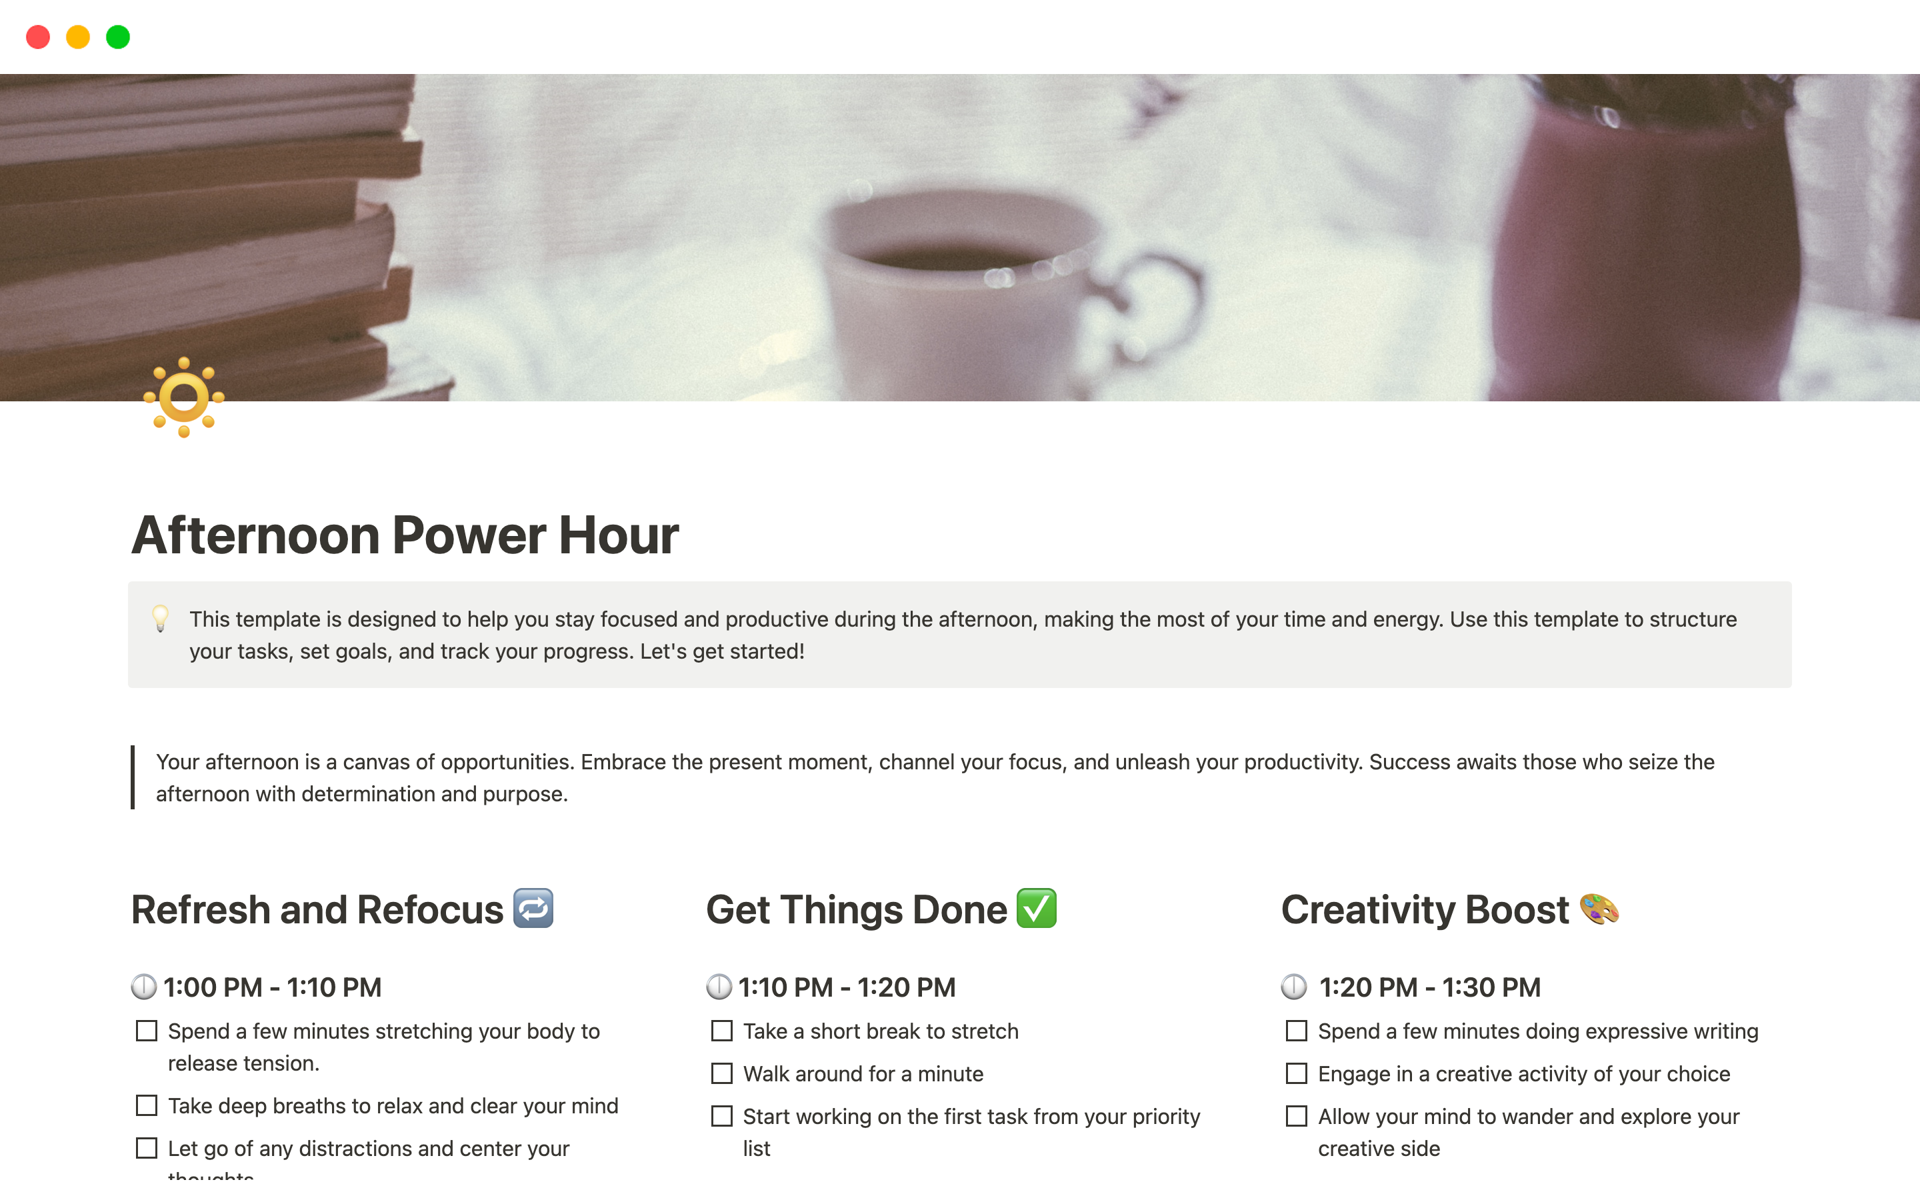 🚀 Boost your afternoon productivity with our simple, effective, and flexible to-do list template - free or pay what you want to support our mission of productivity! 💡💪🏼🌞